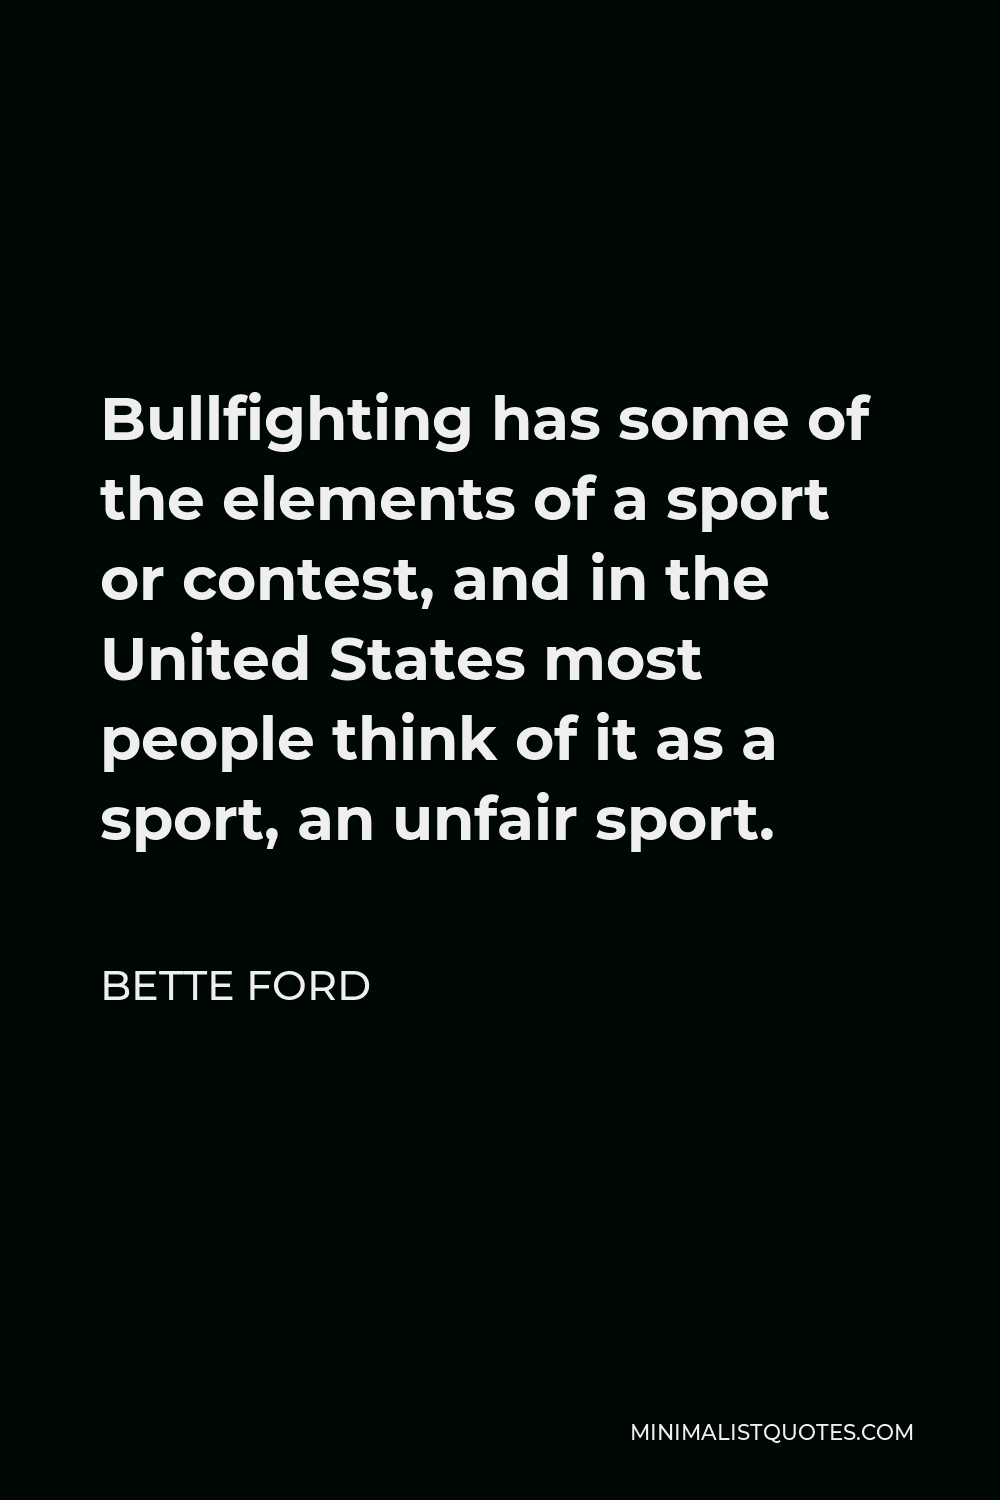 Bette Ford Quote - Bullfighting has some of the elements of a sport or contest, and in the United States most people think of it as a sport, an unfair sport.